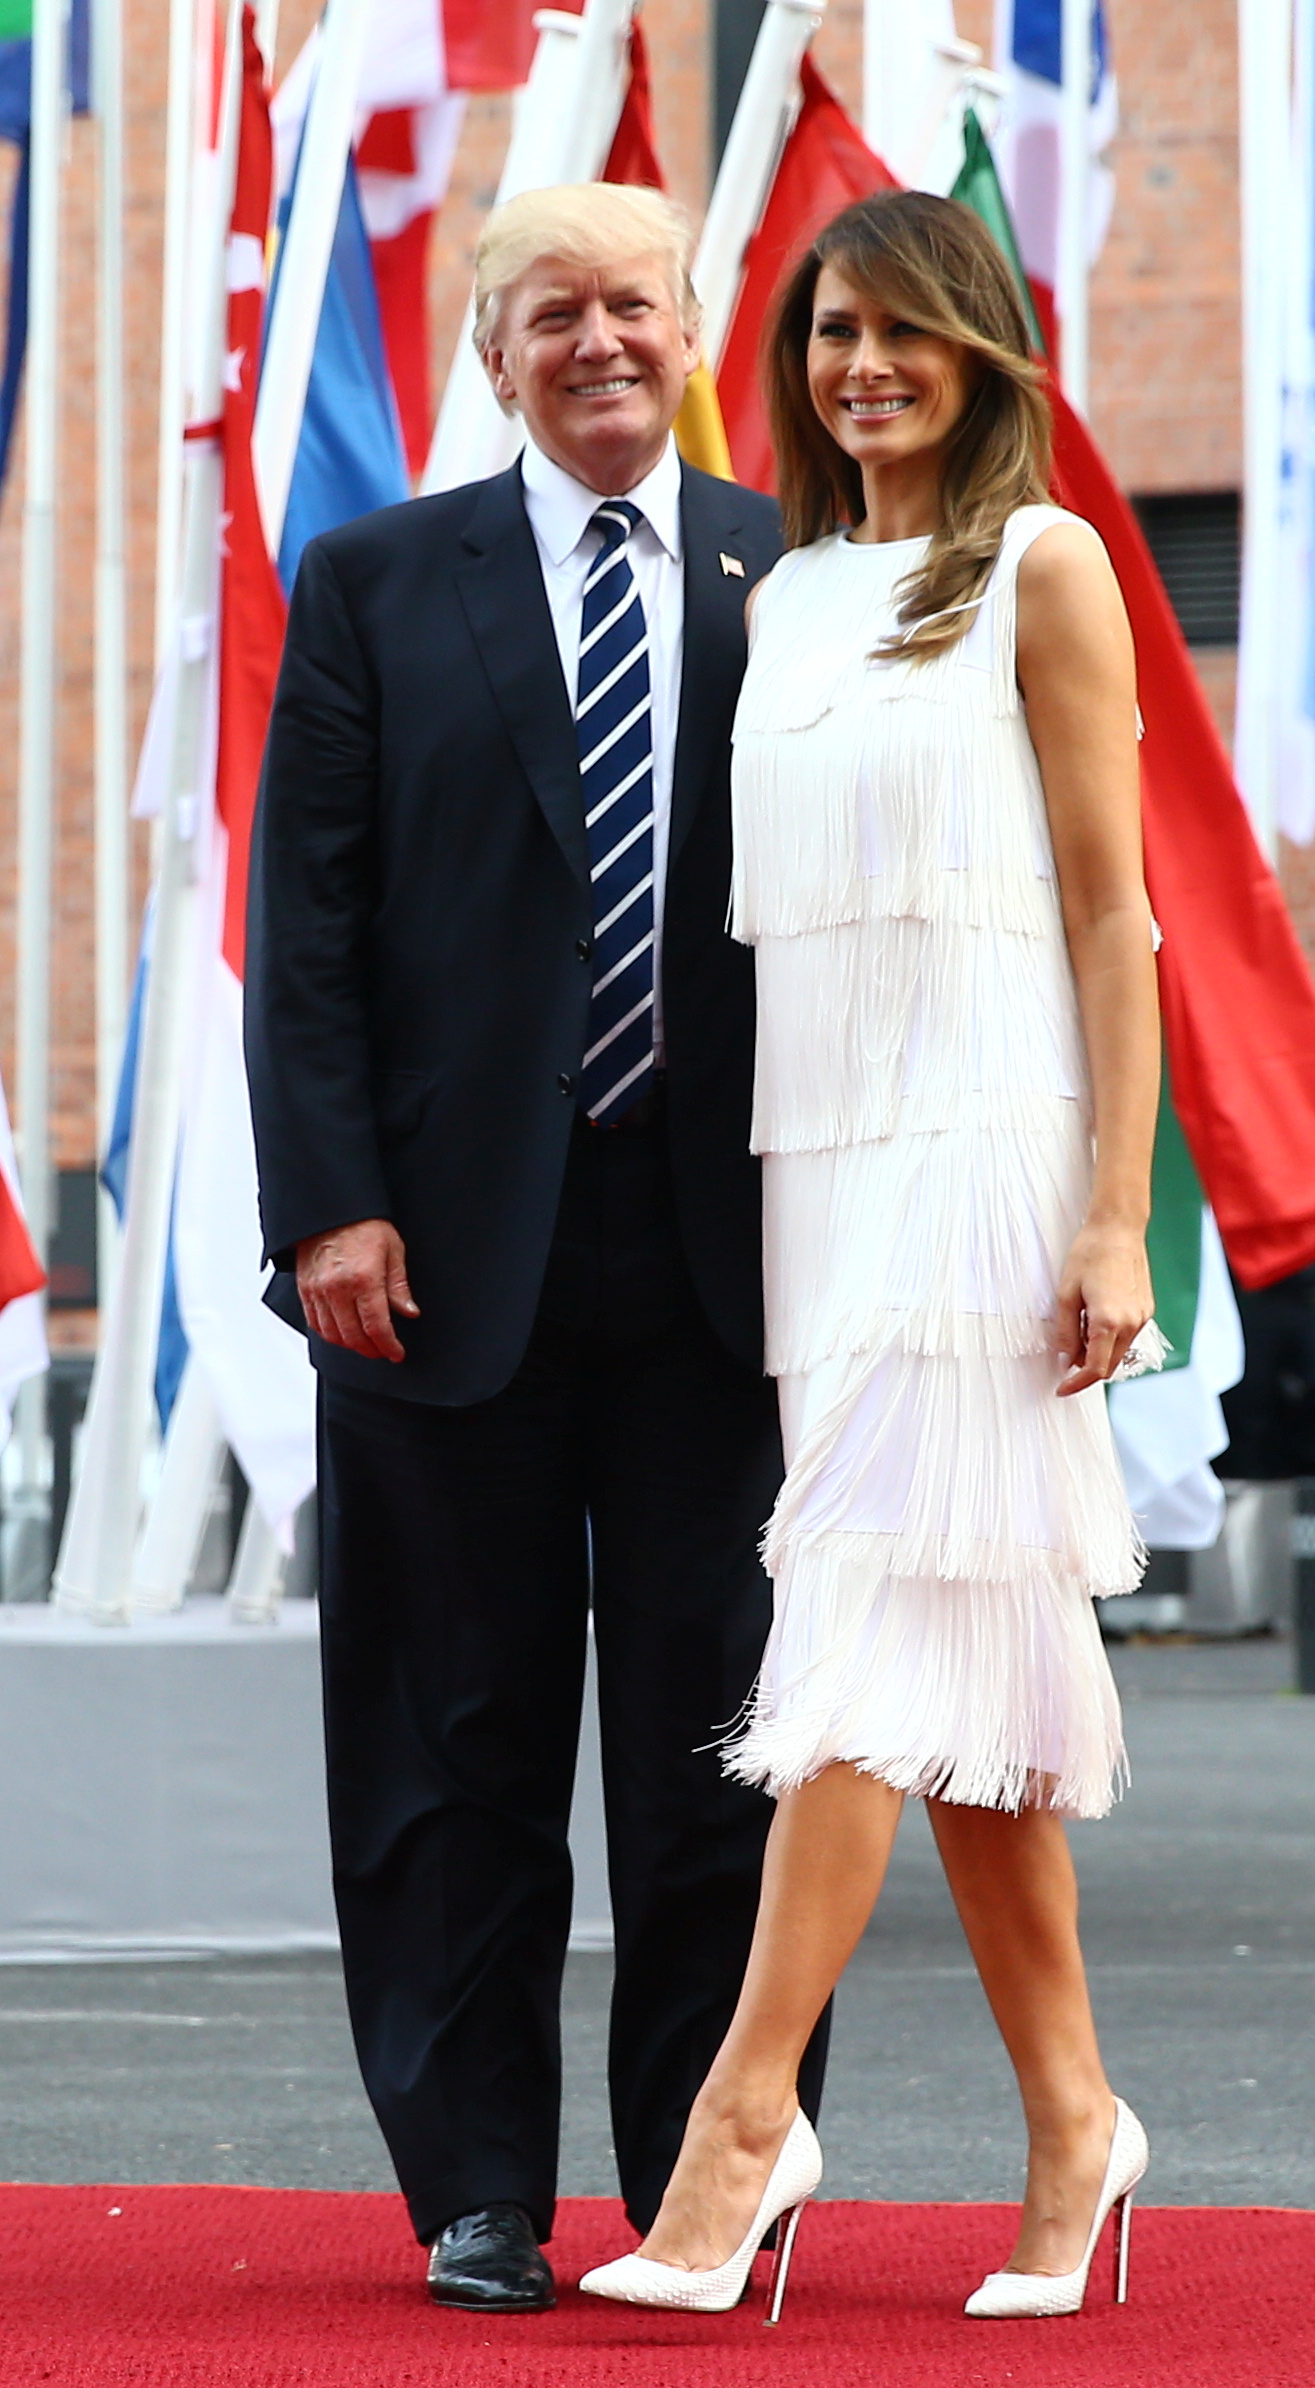 U.S. President Donald Trump and his wife Melania Trump at the G20 summit in Hamburg, Germany. (Photo: REUTERS/Wolfgang Rattay)